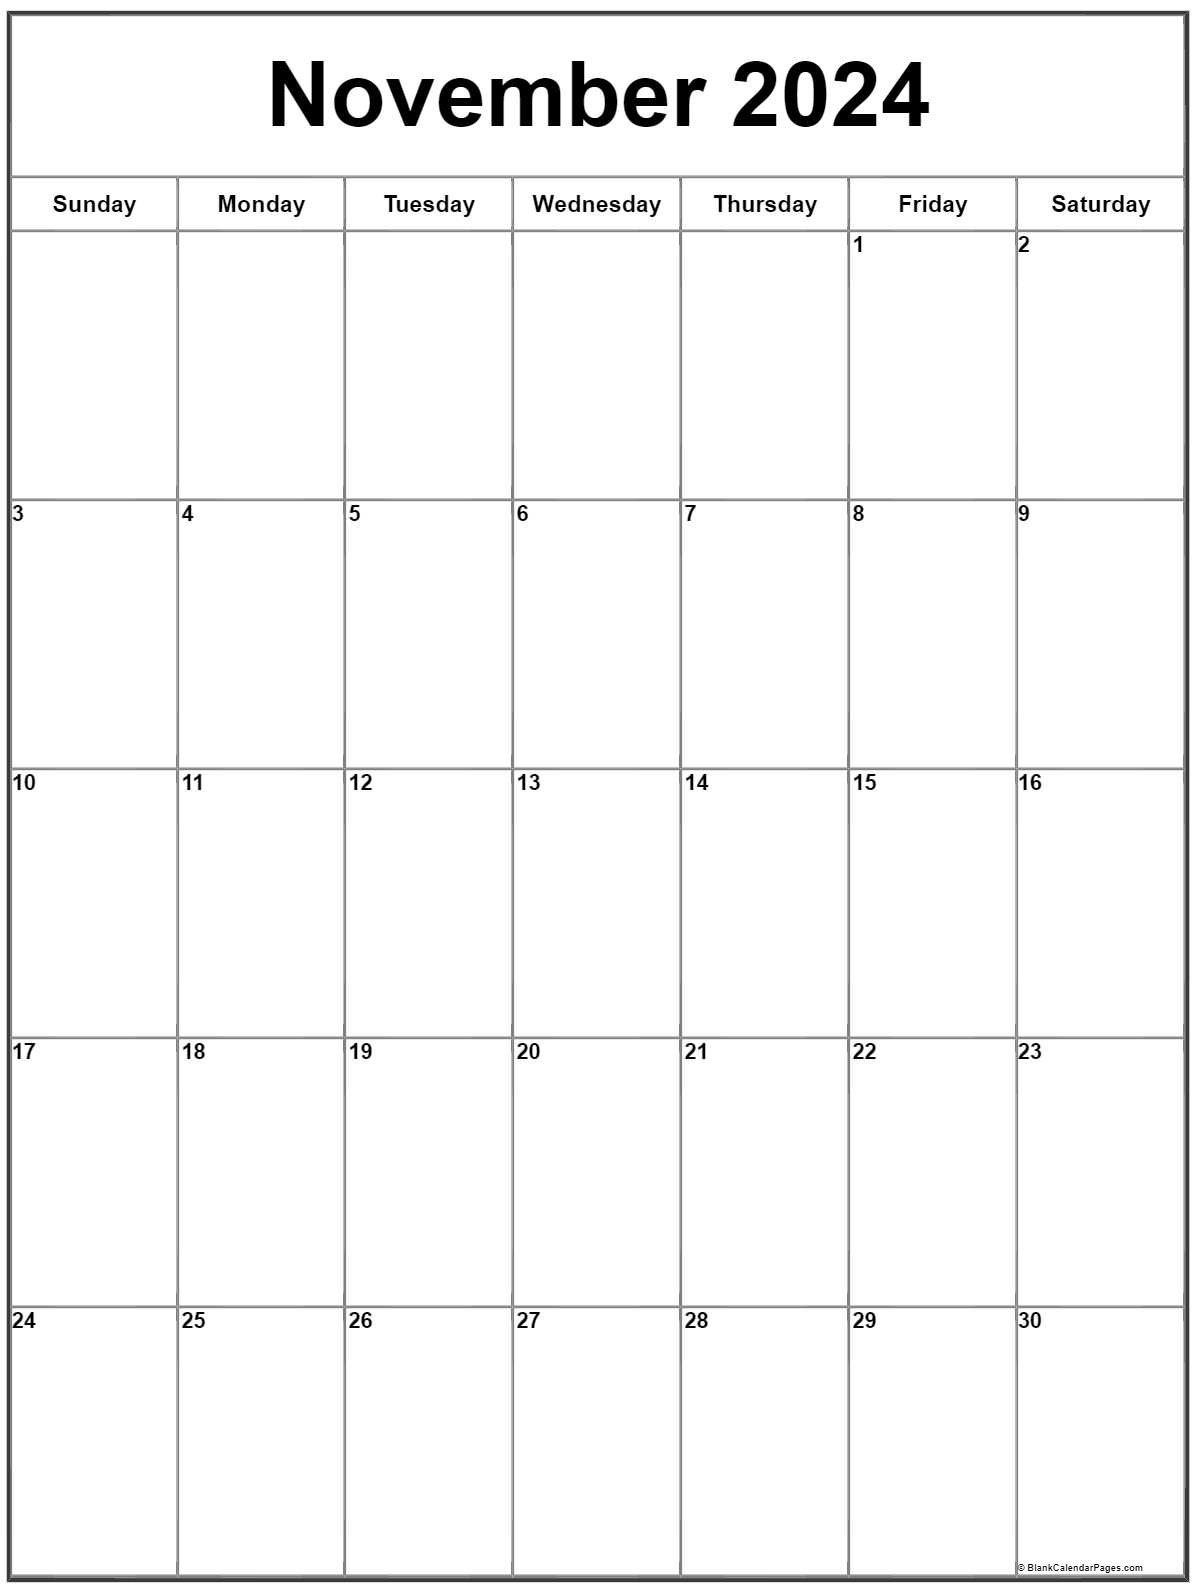 November 2024 Blank Calendar Your Personal Planning Assistant Free